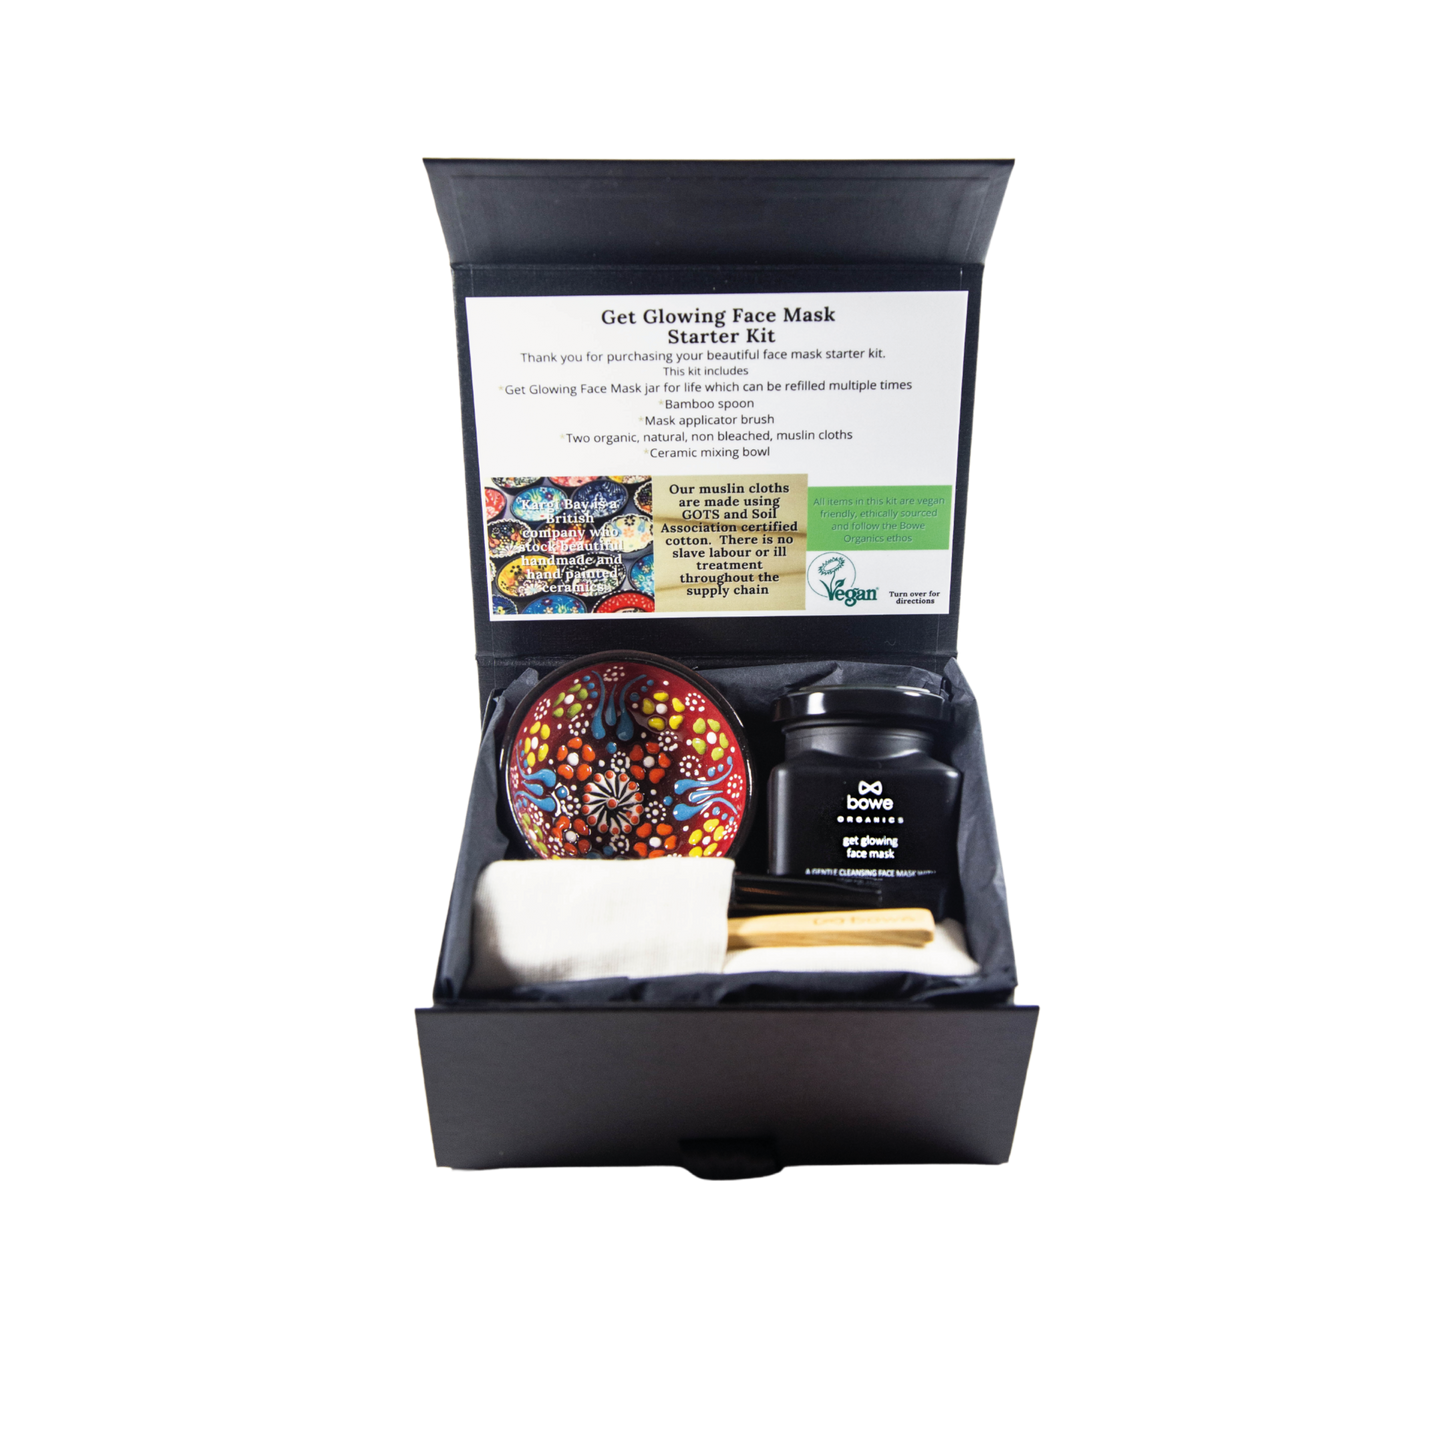 Black gift box with black tissue paper inside and contains a clay face mask gift set with a handpainted turkish style bowl a wooden mask mixing spoon, black face mask applicator brush, two organic cotton GOTS face cloths. Box is open and facing towards the camera